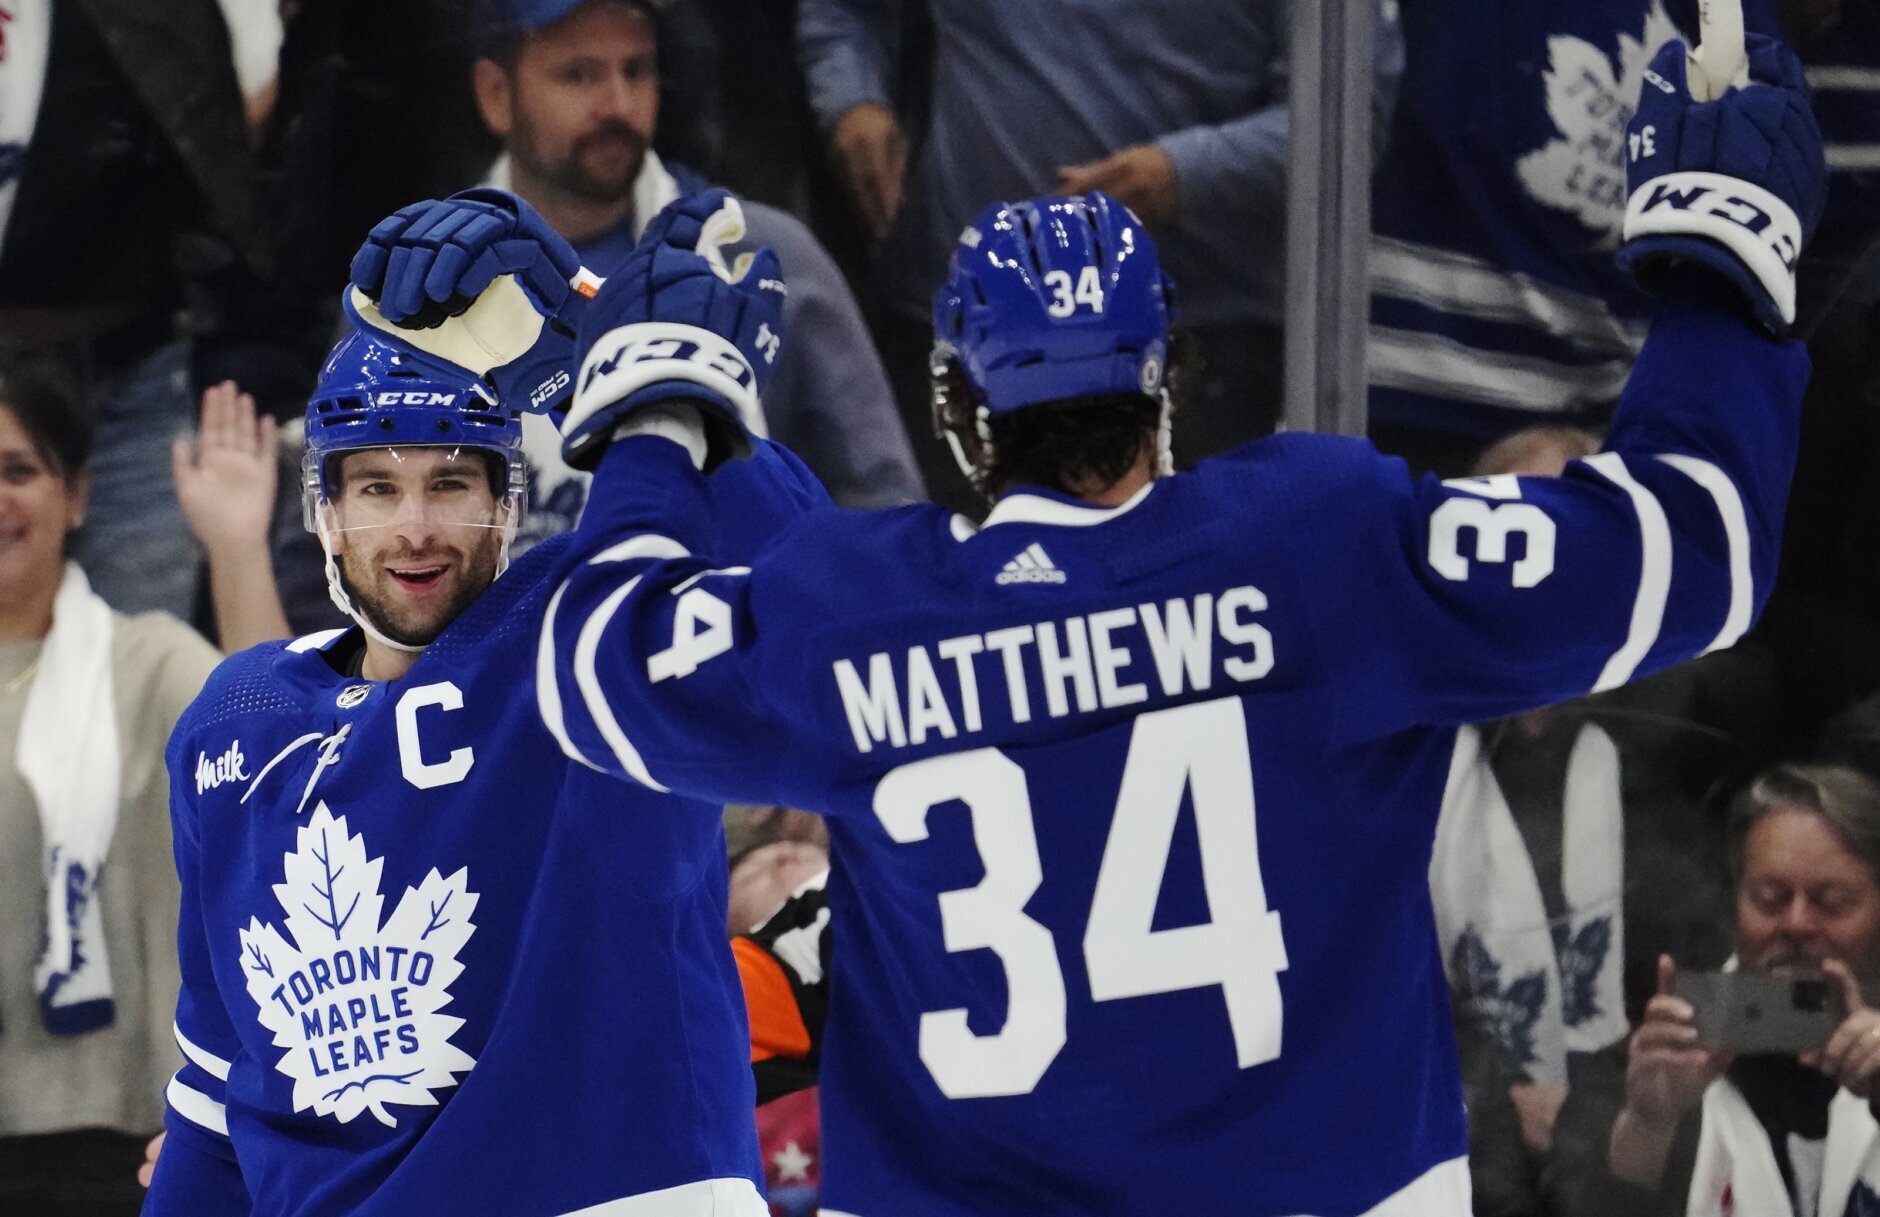 Auston Matthews returns, leads Leafs past Blackhawks - The Rink Live   Comprehensive coverage of youth, junior, high school and college hockey